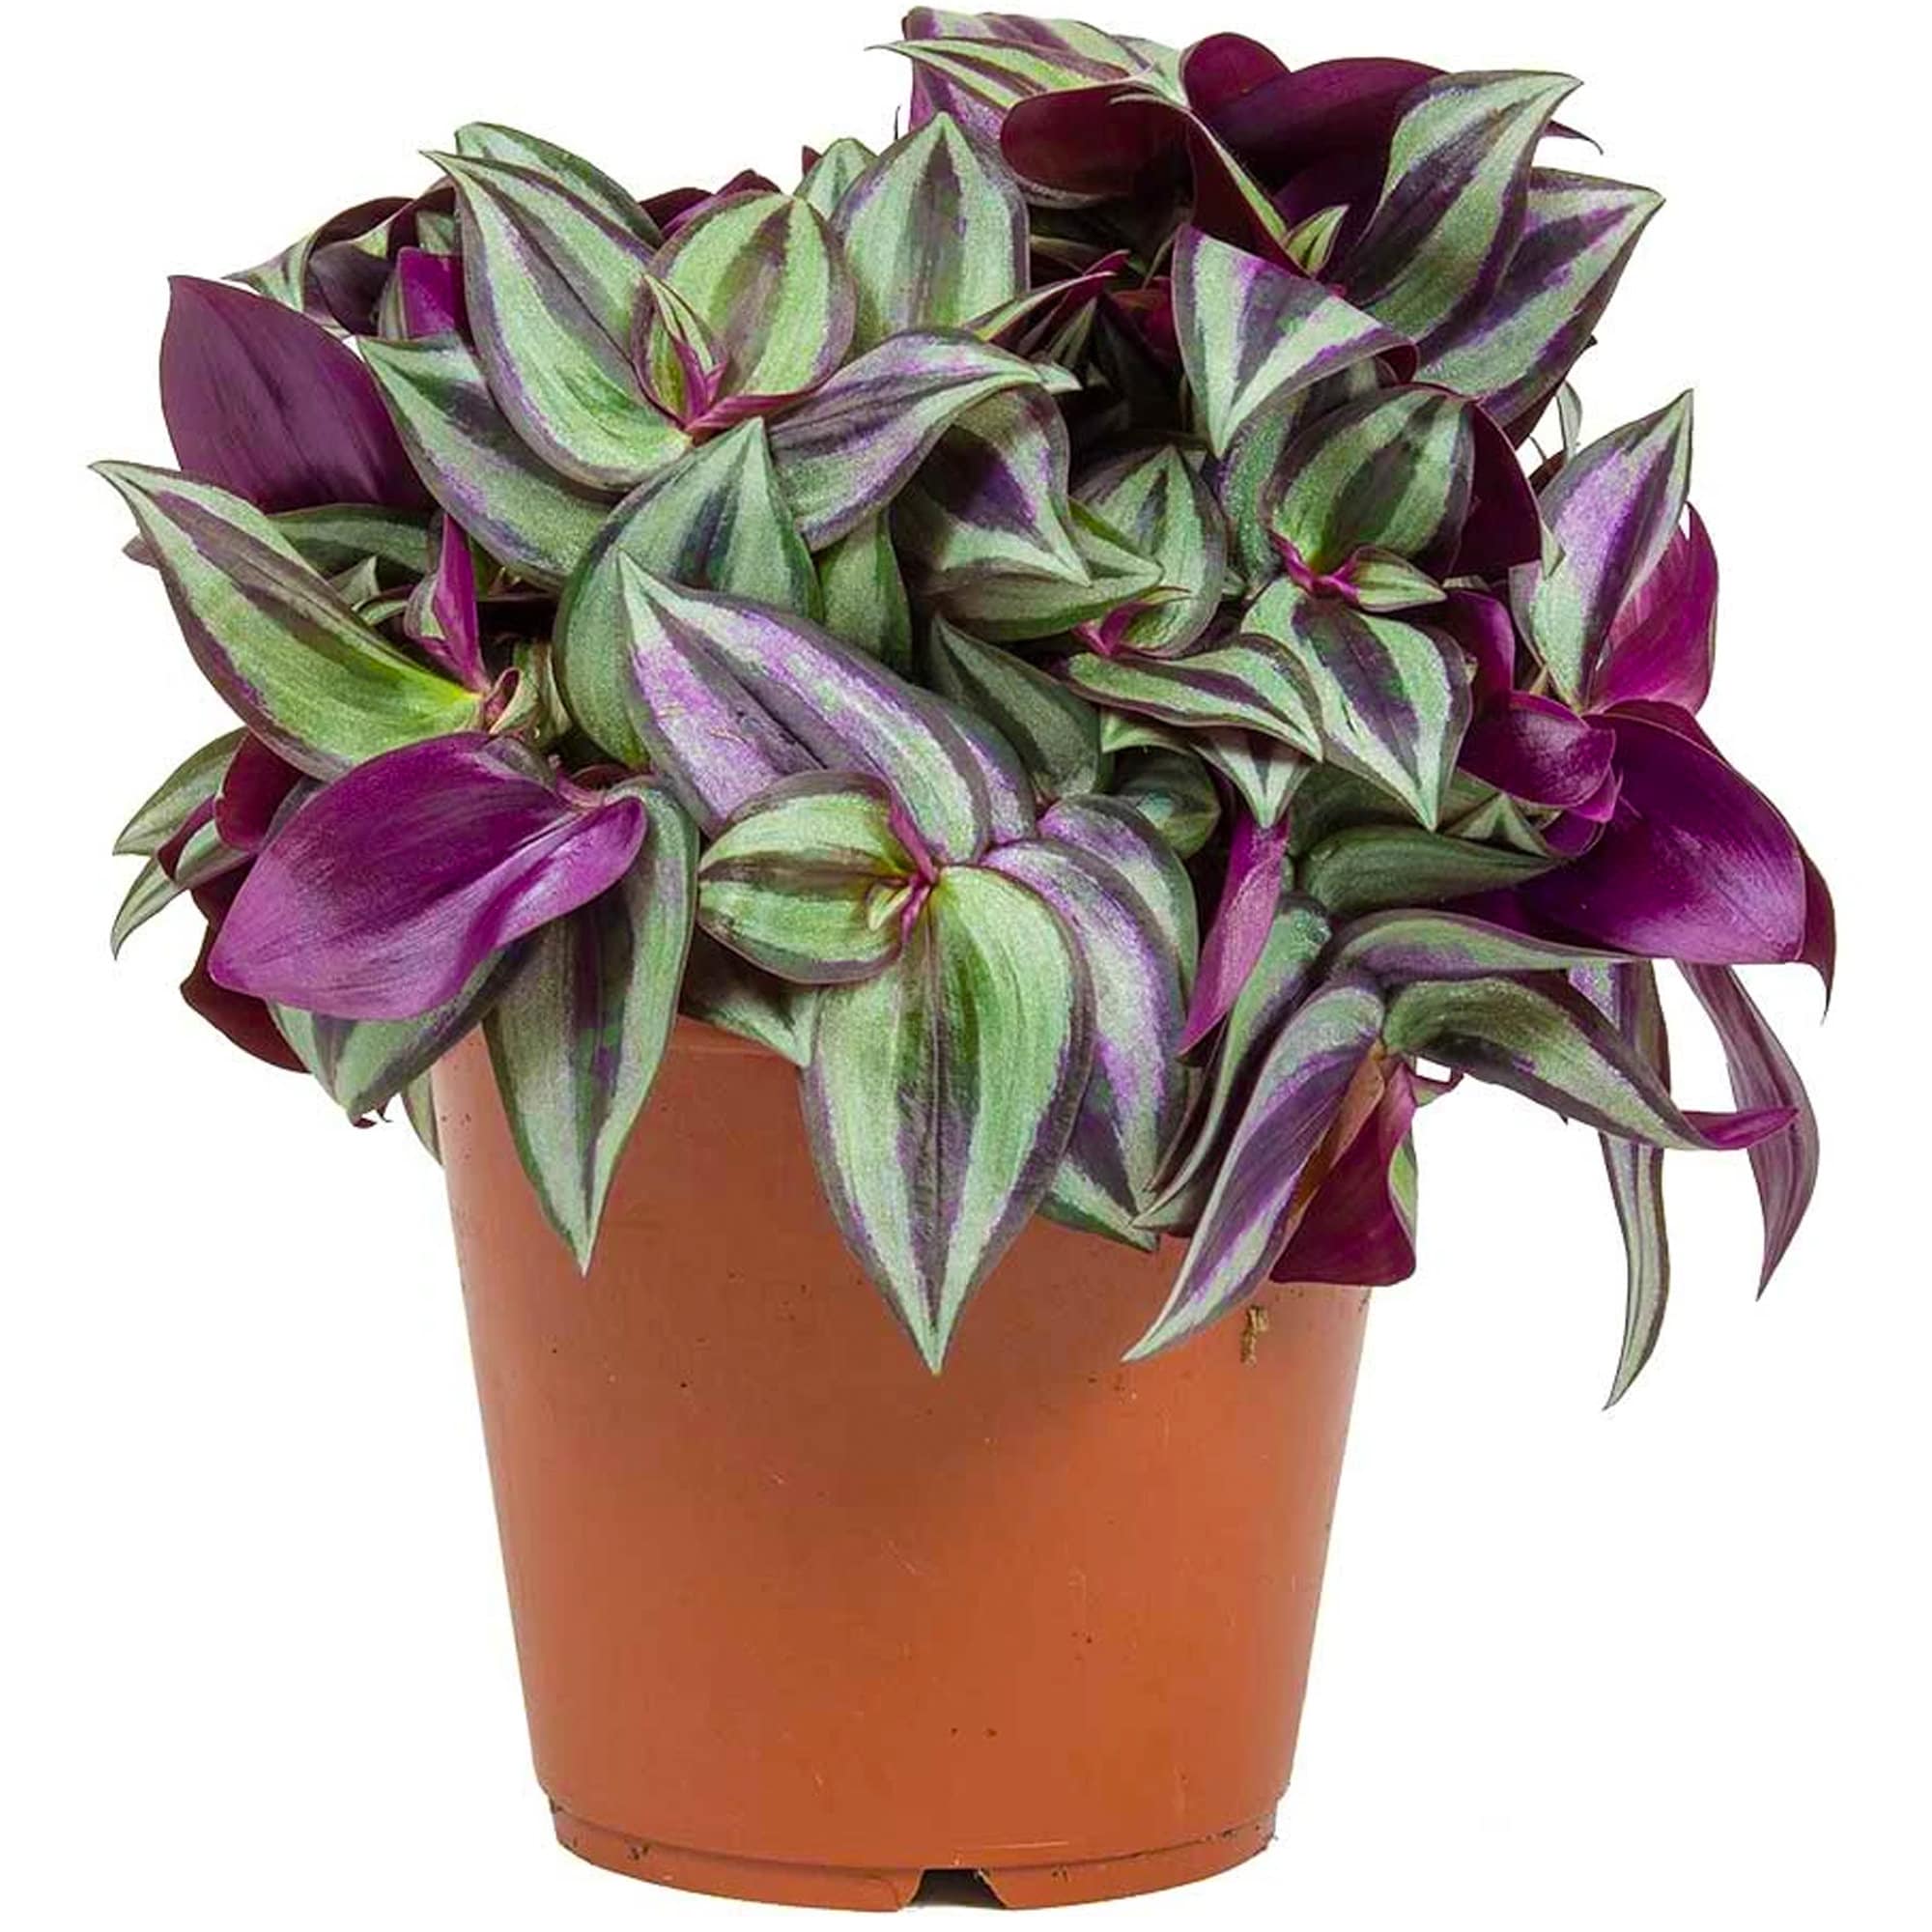 Tradescantia Zebrina Inch Plant Wandering Jew for Home Etsy Israel